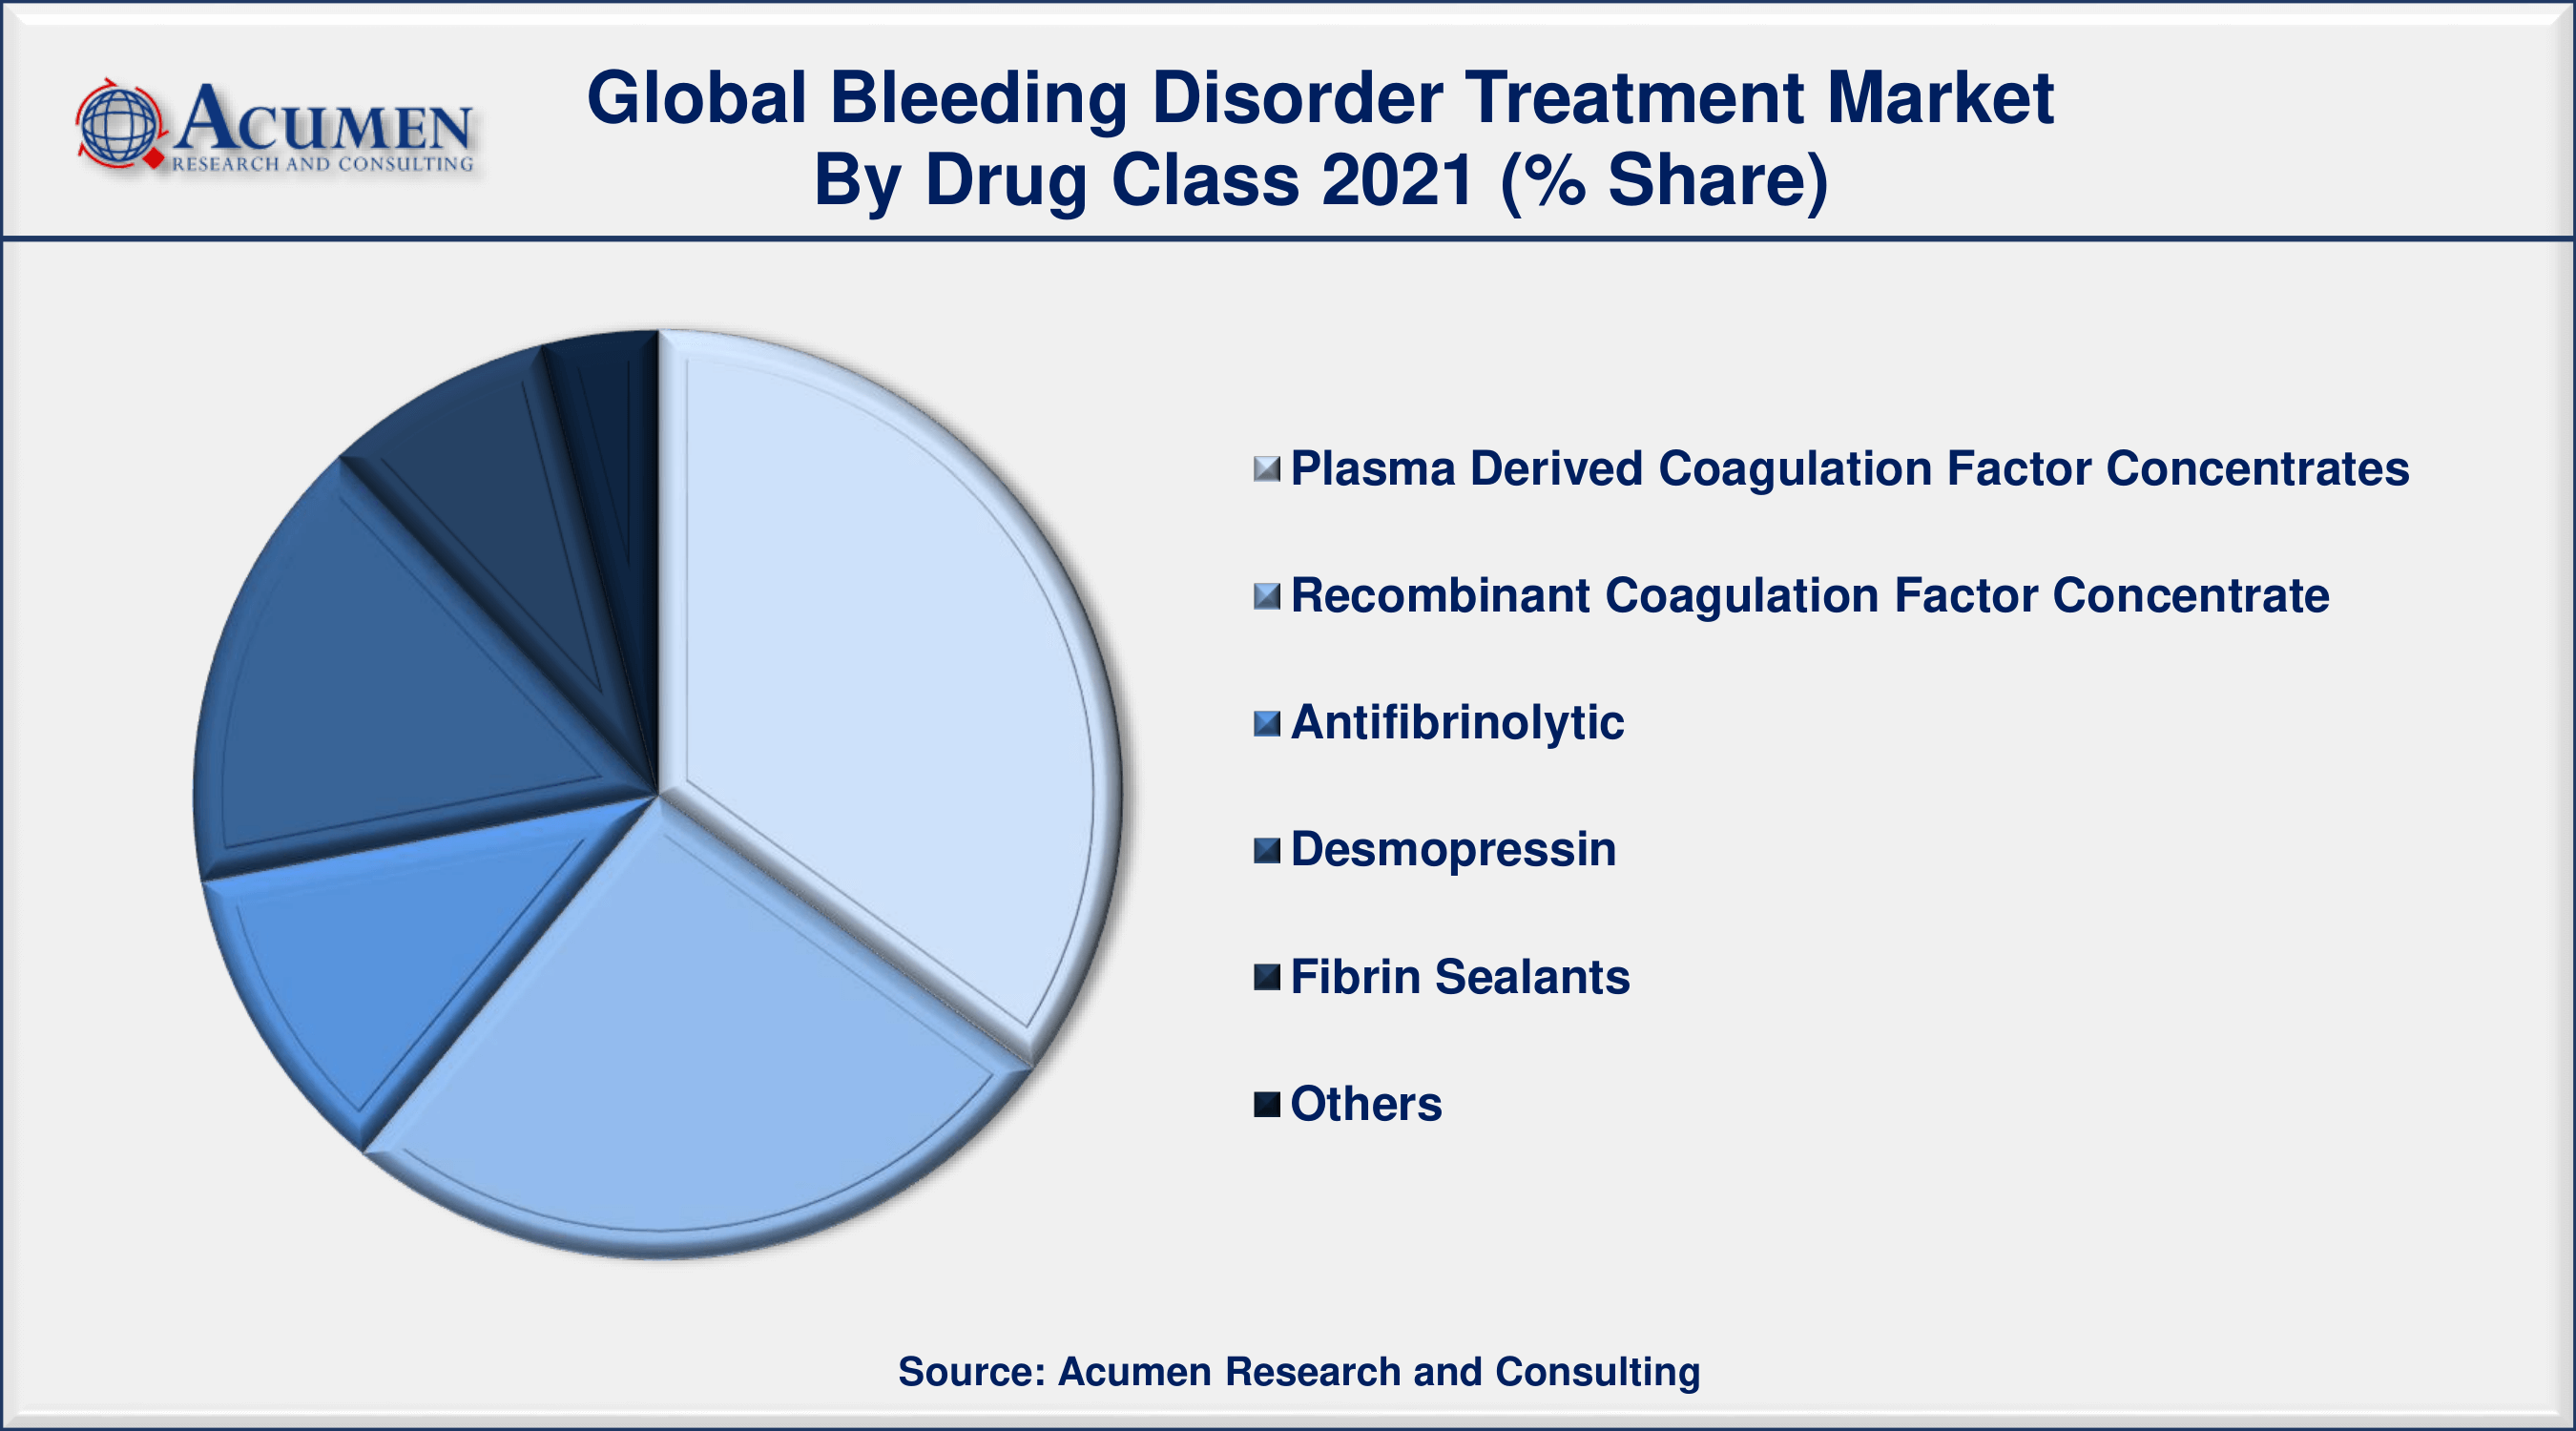 North America bleeding disorder treatment market accounting for nearly 34% of the total market share in 2021